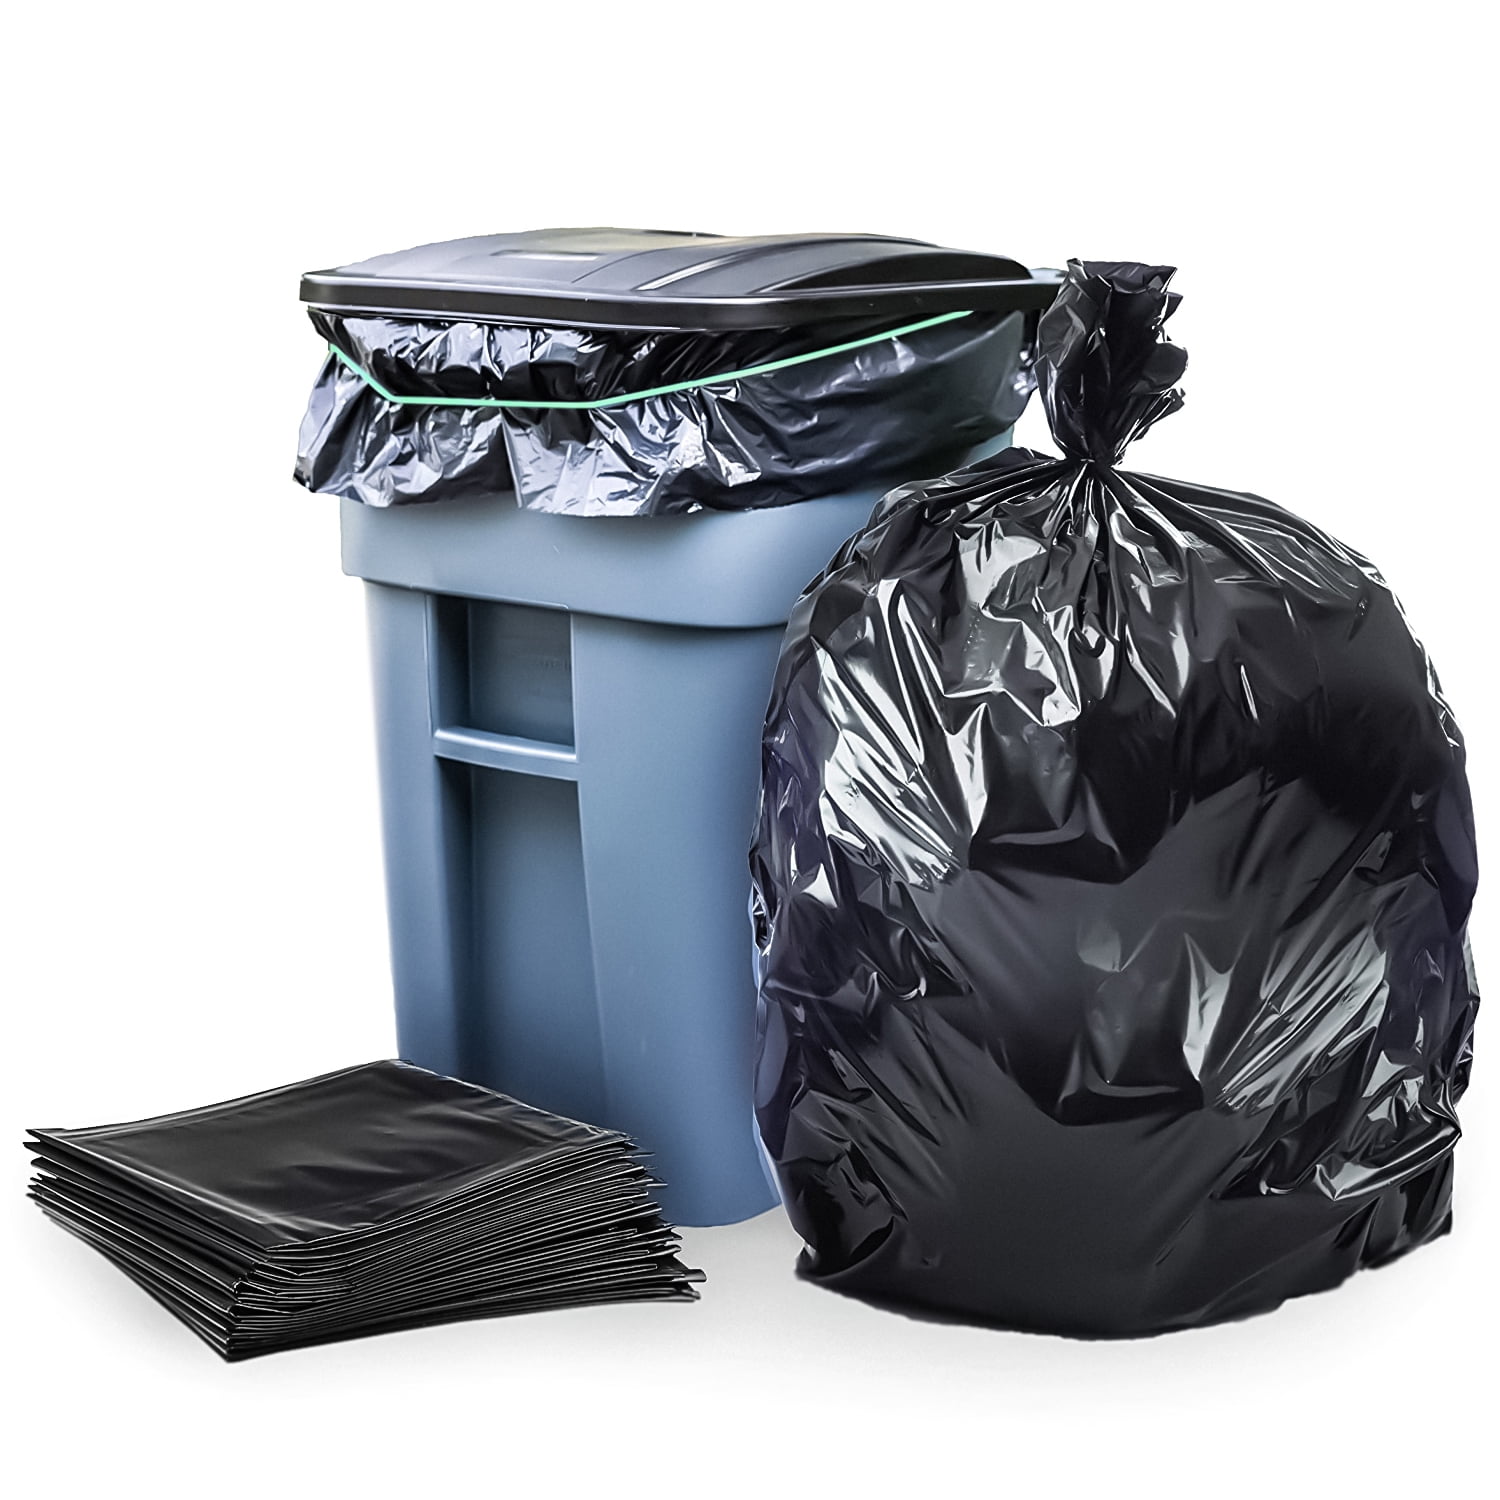 ... 25 Count w/Ties Details about   95-96 Gallon Clear Garbage Bags, Large Plastic Trash Bags 